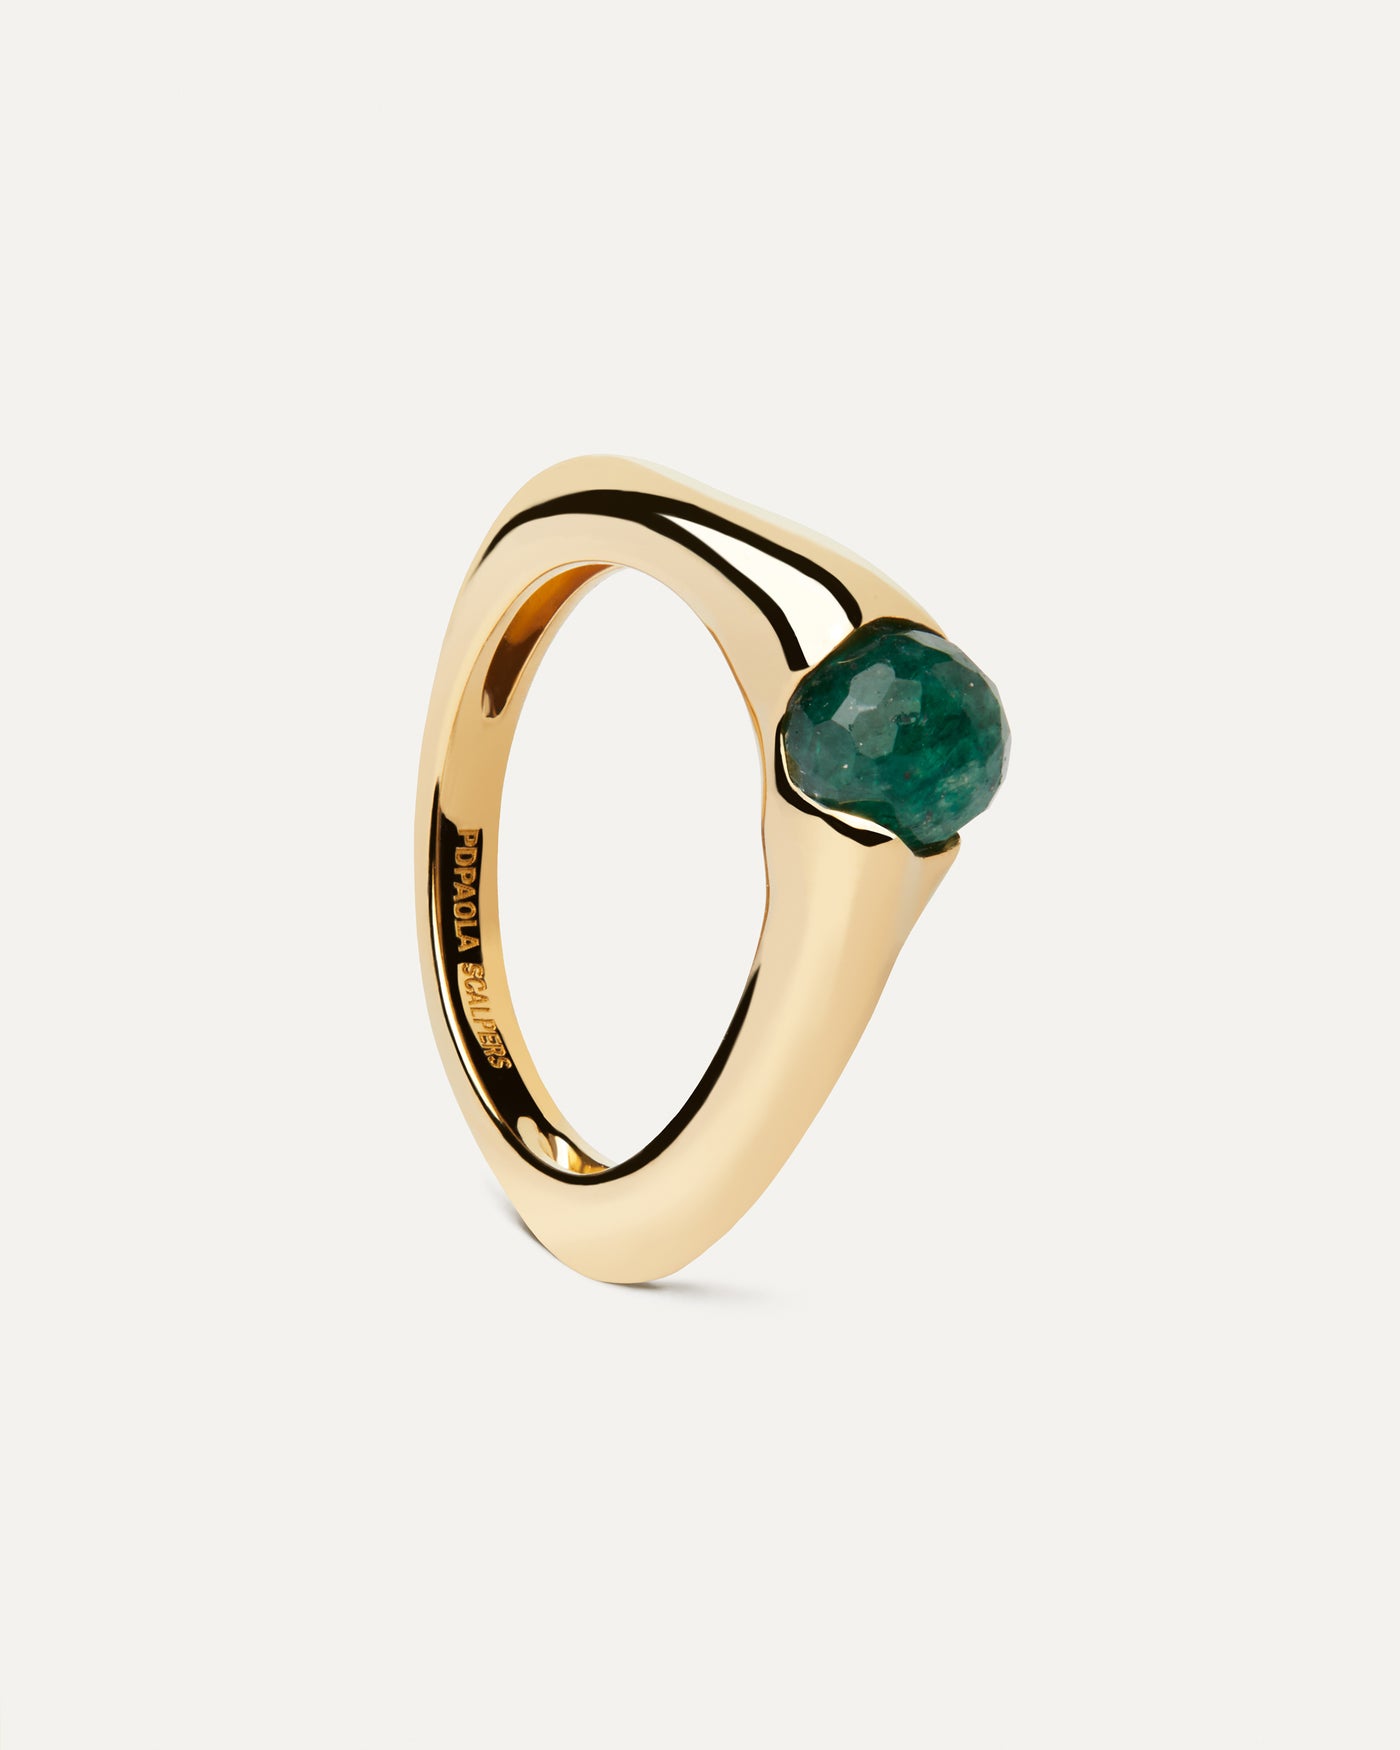 2023 Selection | Oasis Ring. Gold-plated organic shape stacking ring featuring a round cut green aventurine gemstone. Get the latest arrival from PDPAOLA. Place your order safely and get this Best Seller. Free Shipping.